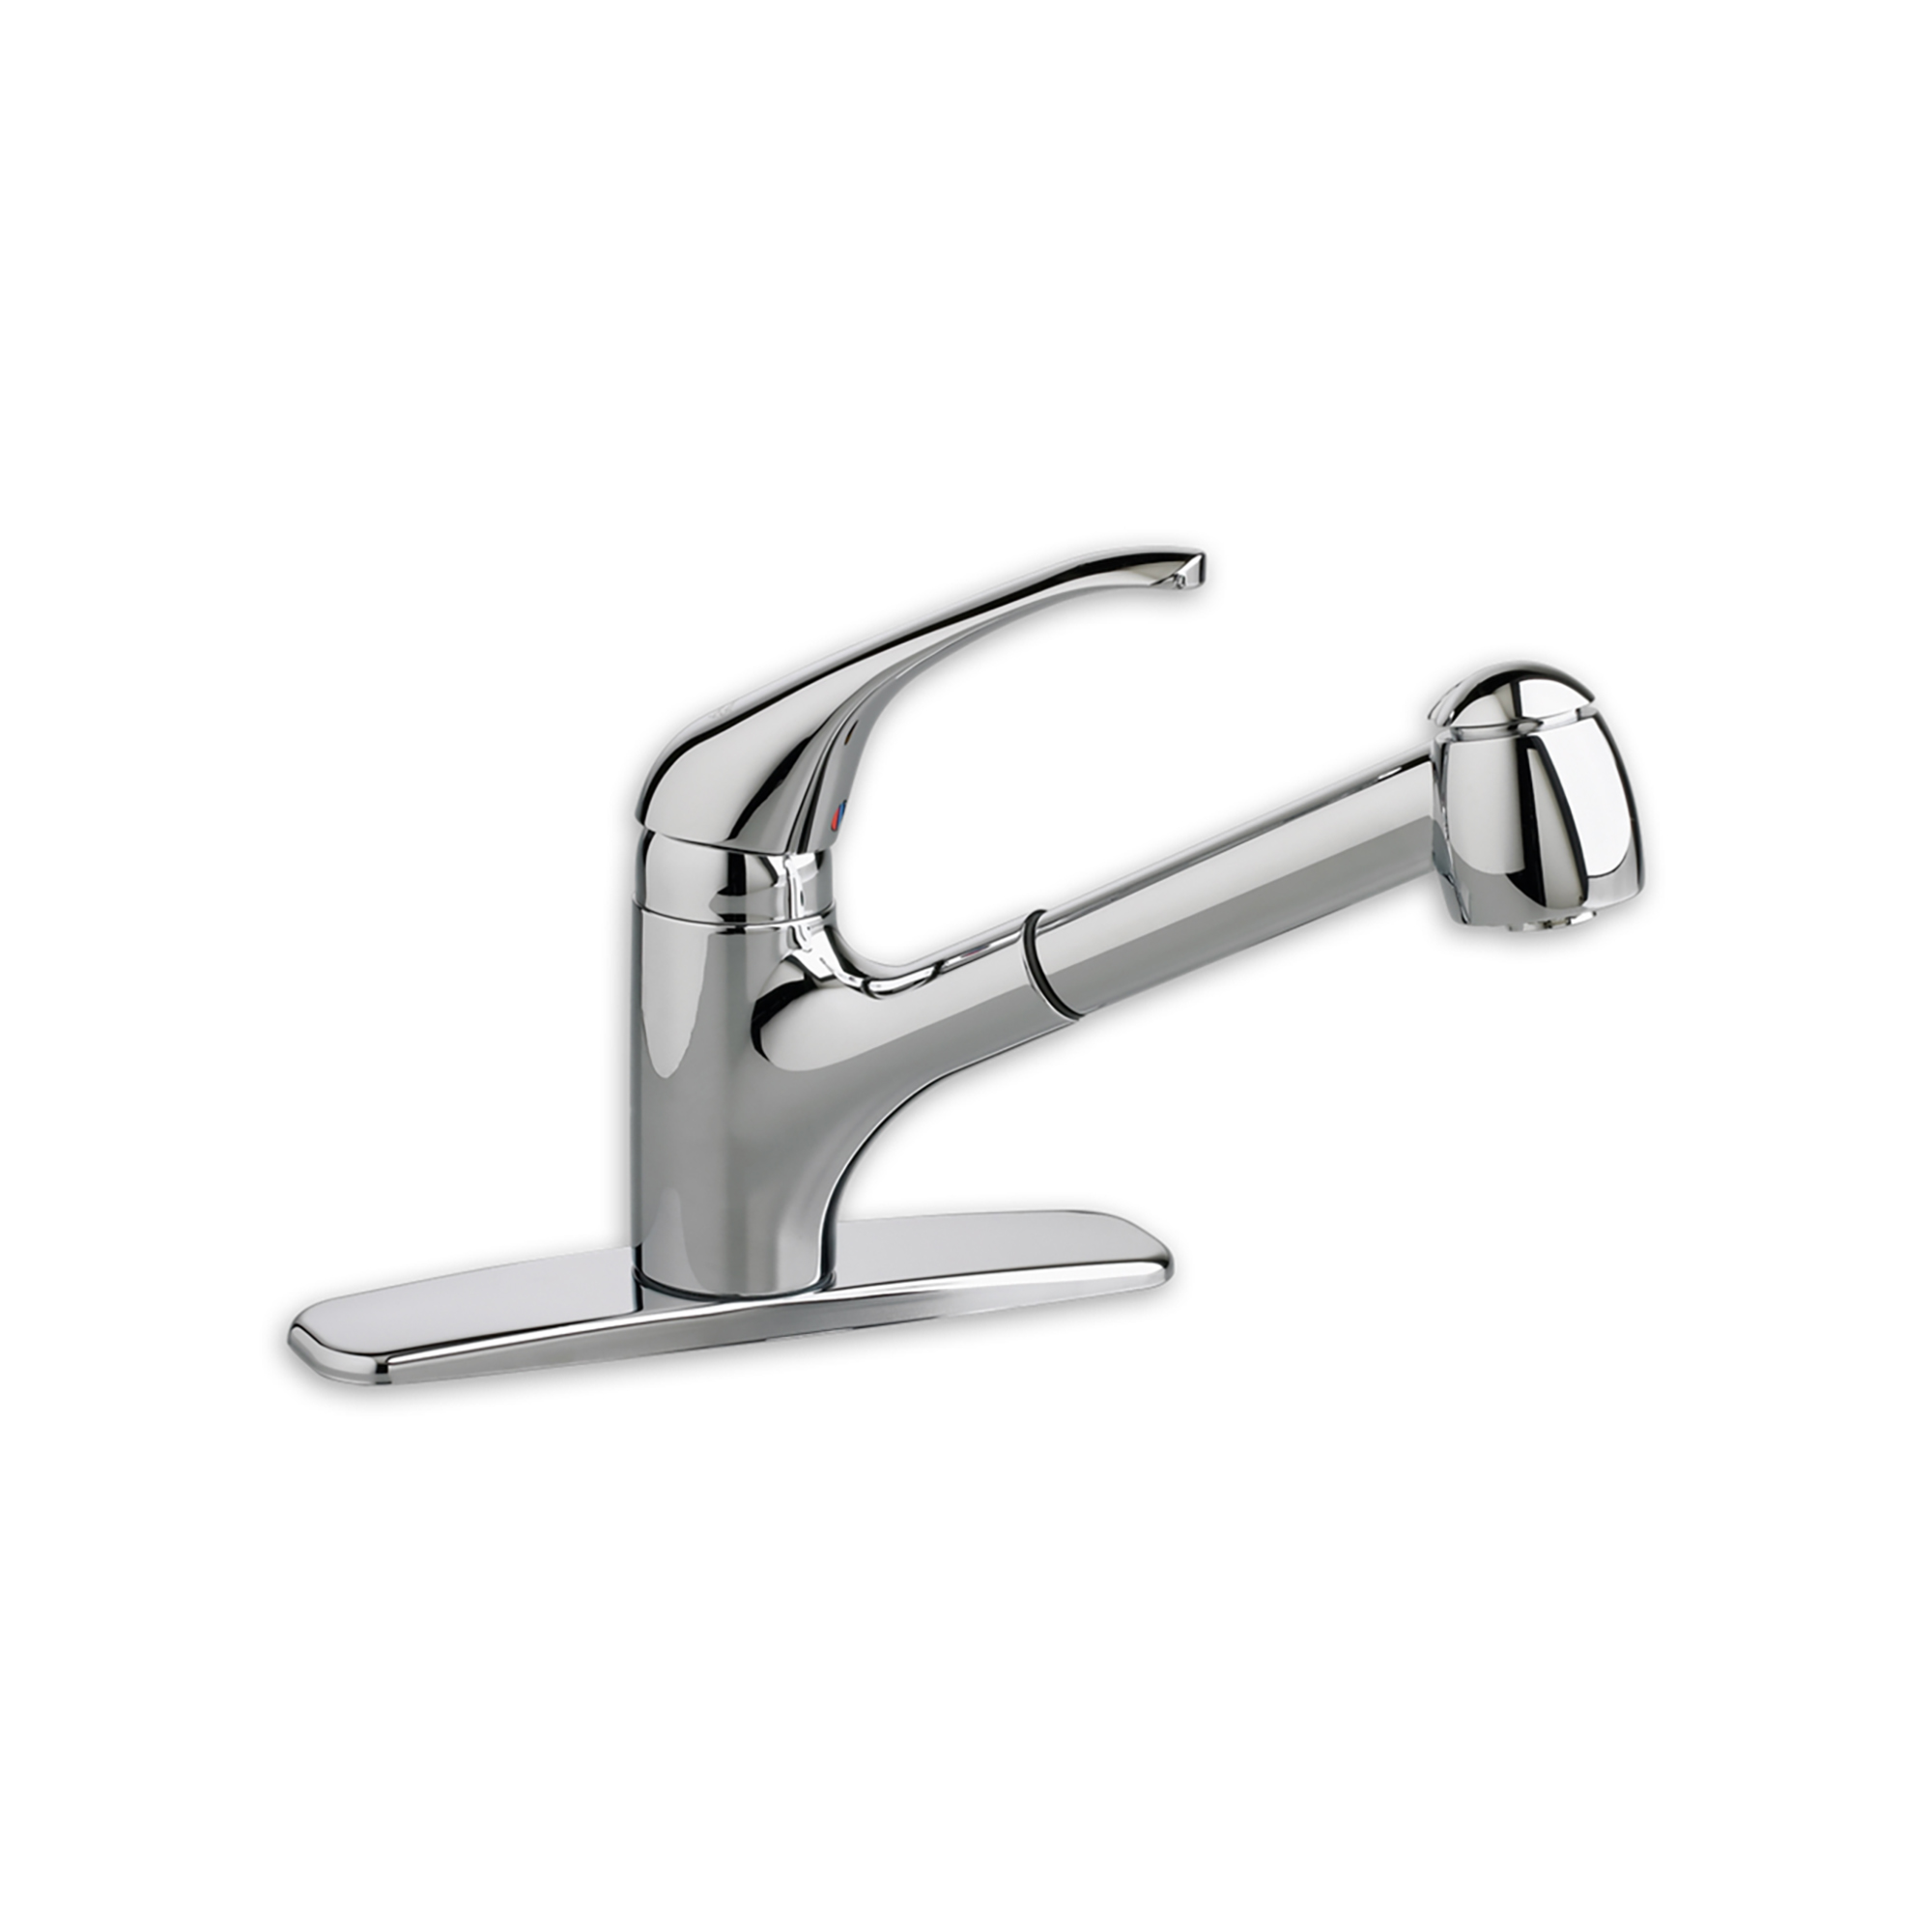 Reliant+™ Single-Handle Pull-Out Dual-Spray Kitchen Faucet 2.2 gpm/8.3 L/min